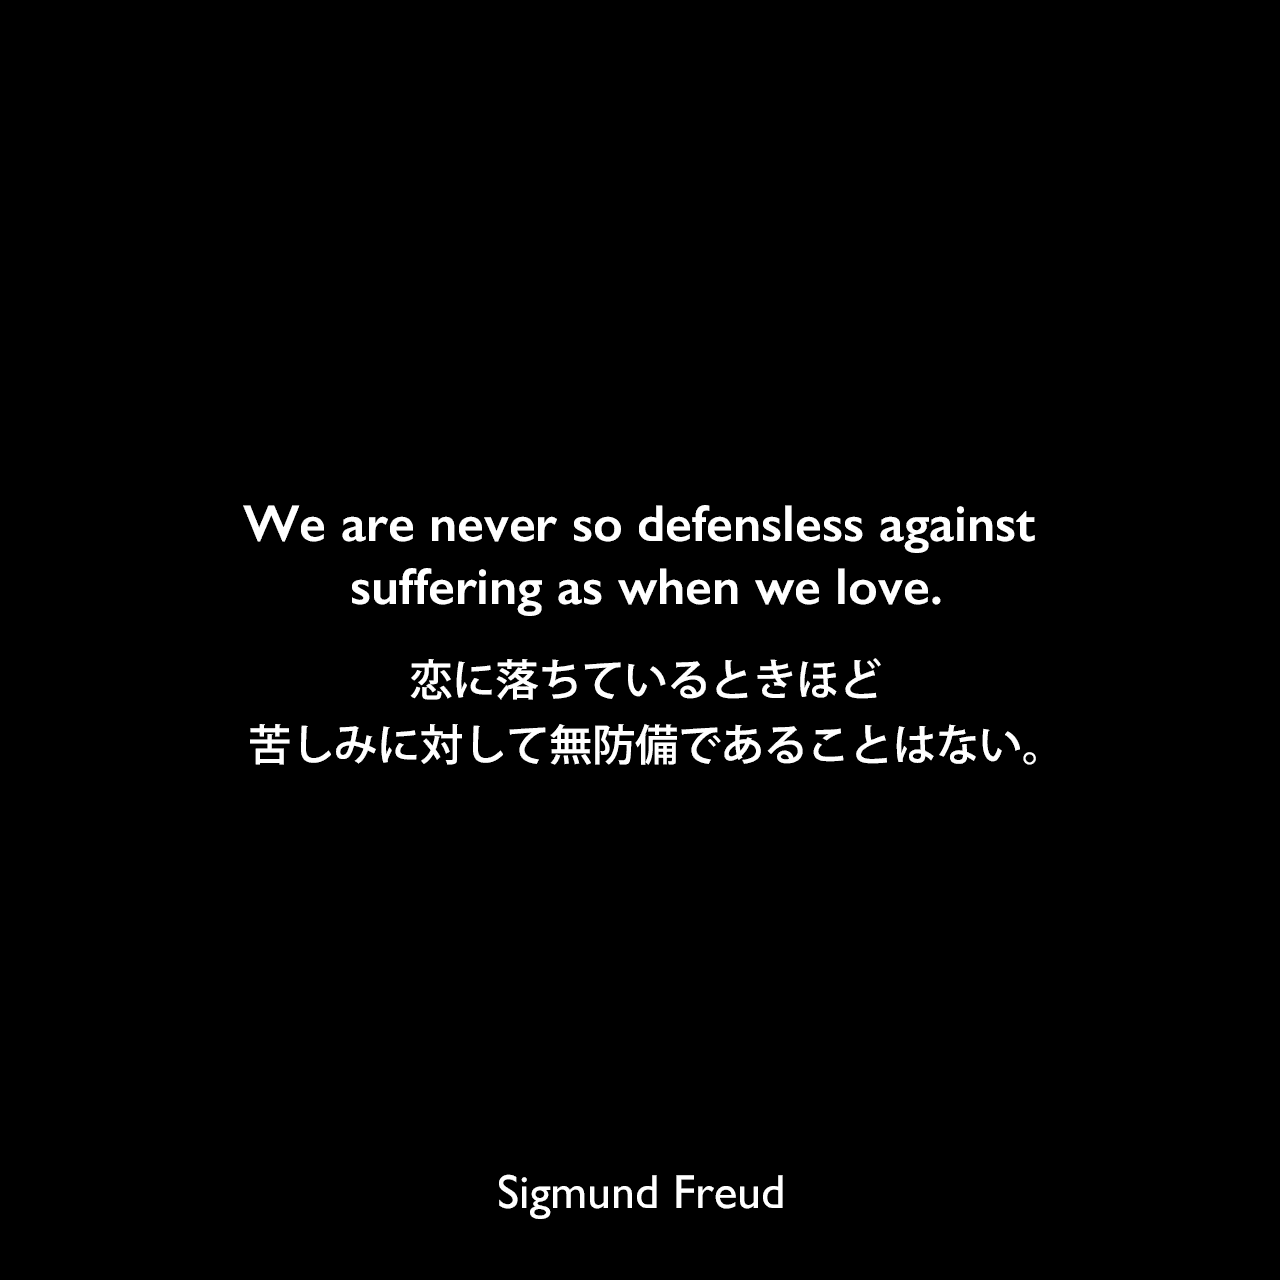 We are never so defensless against suffering as when we love.恋に落ちているときほど、苦しみに対して無防備であることはない。